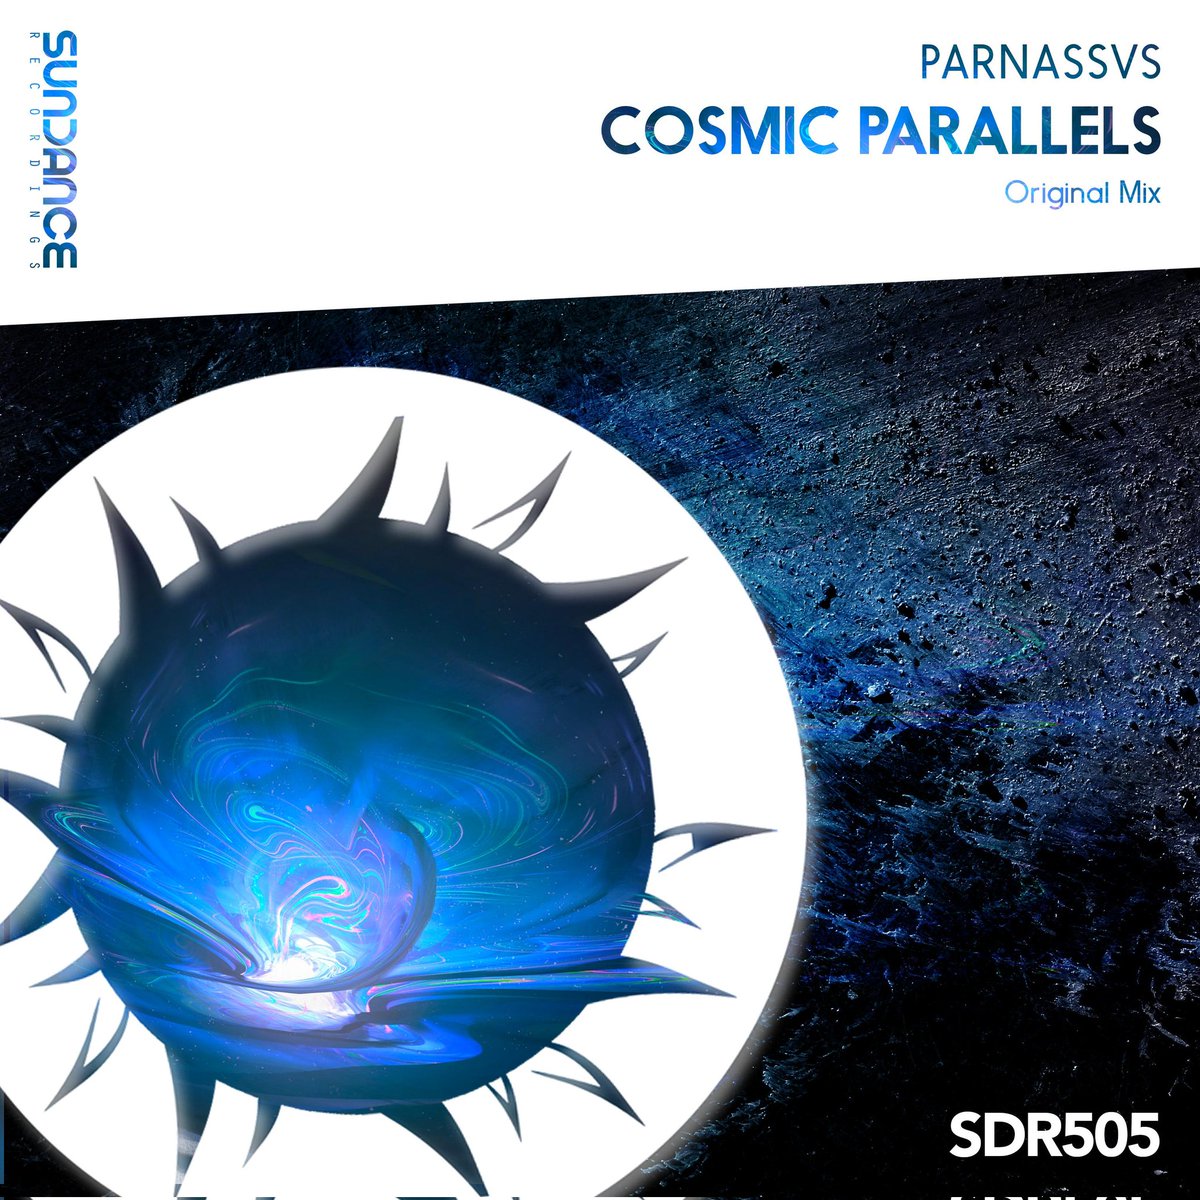 Parnassvs 'Cosmic Parallels' Exclusive Release : 5th November, 2021 Full Audio ► fanlink.to/sdr505 Official Video ► fanlink.to/sundancerecord… #sundancerecordings #parnassvs #uplifting #trance #promo 5th Week, October 2021 sundancerecordings.com